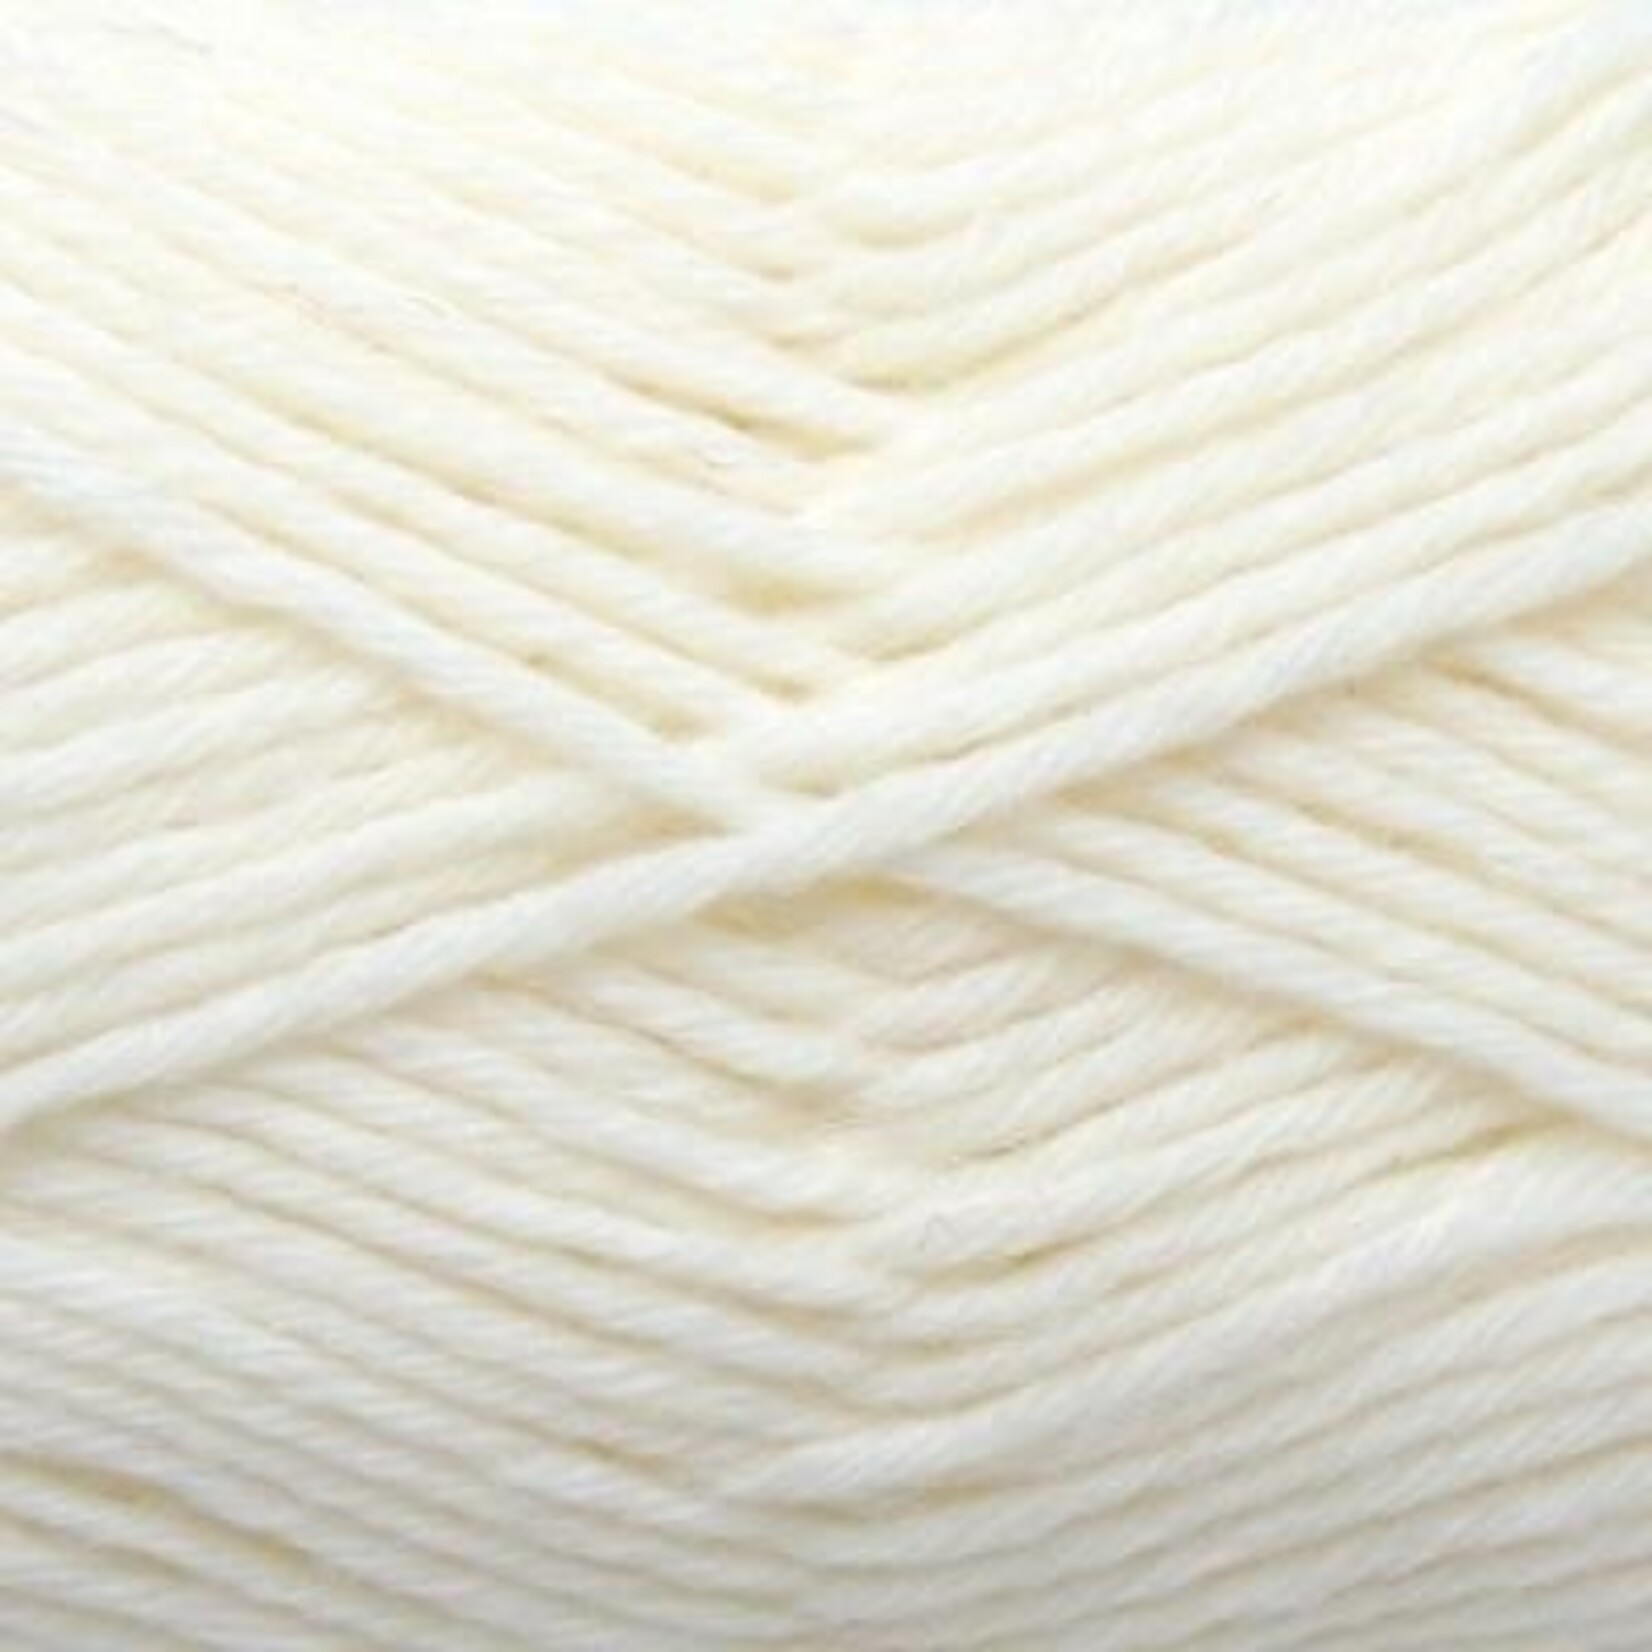 Comfort Wolle Yarns Comfort Wolle Uni (8ply)  by Comfort Wolle Yarns